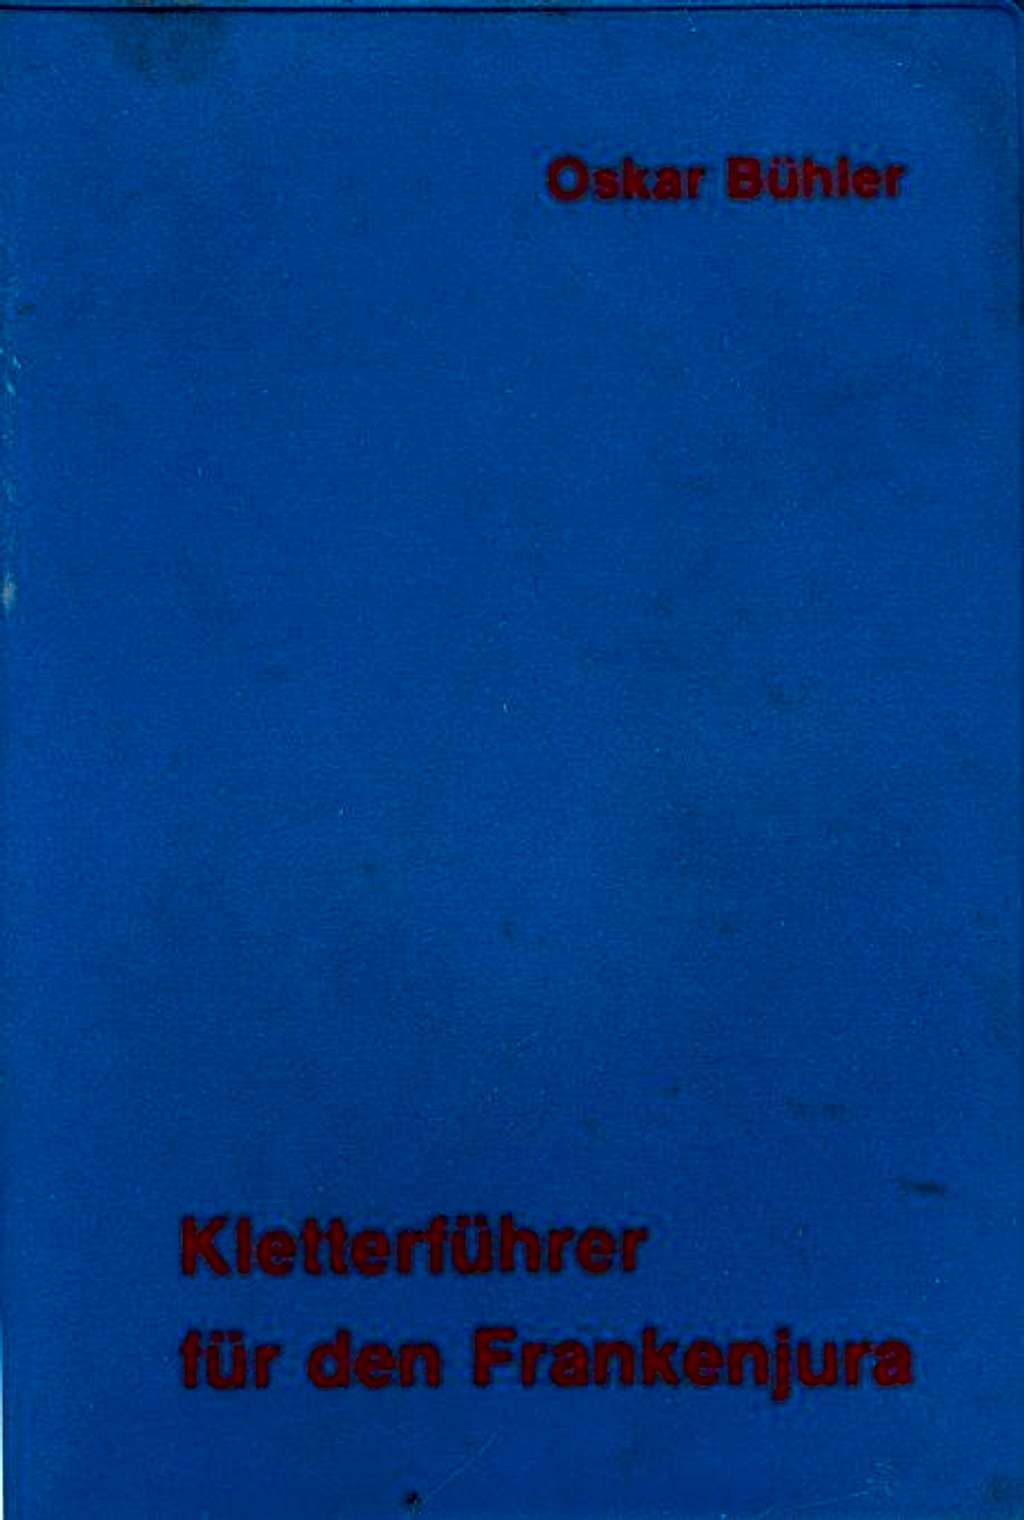 1979 guide - cover